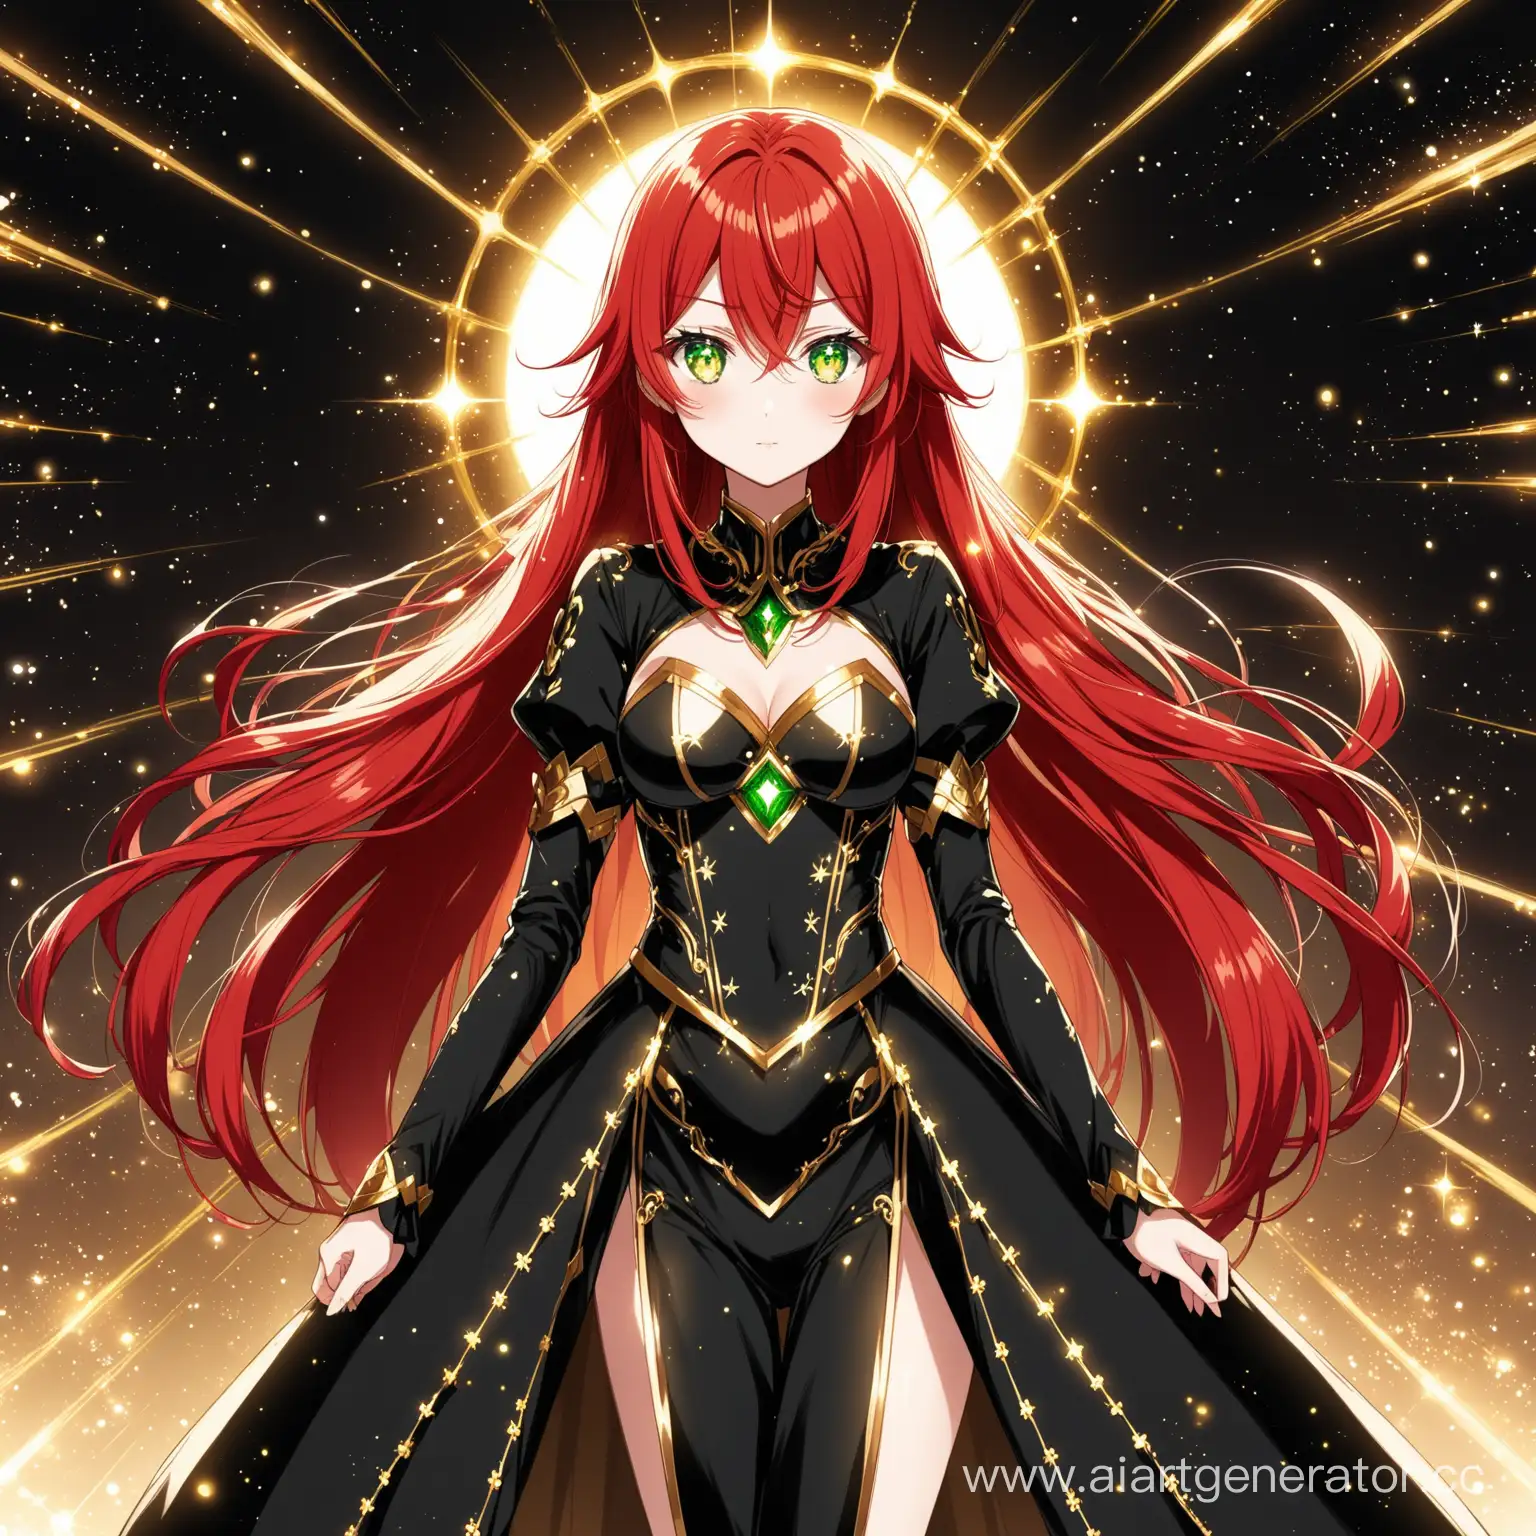 Ethereal-Anime-Girl-with-Crimson-Hair-in-Elegant-Black-and-Gold-Costume